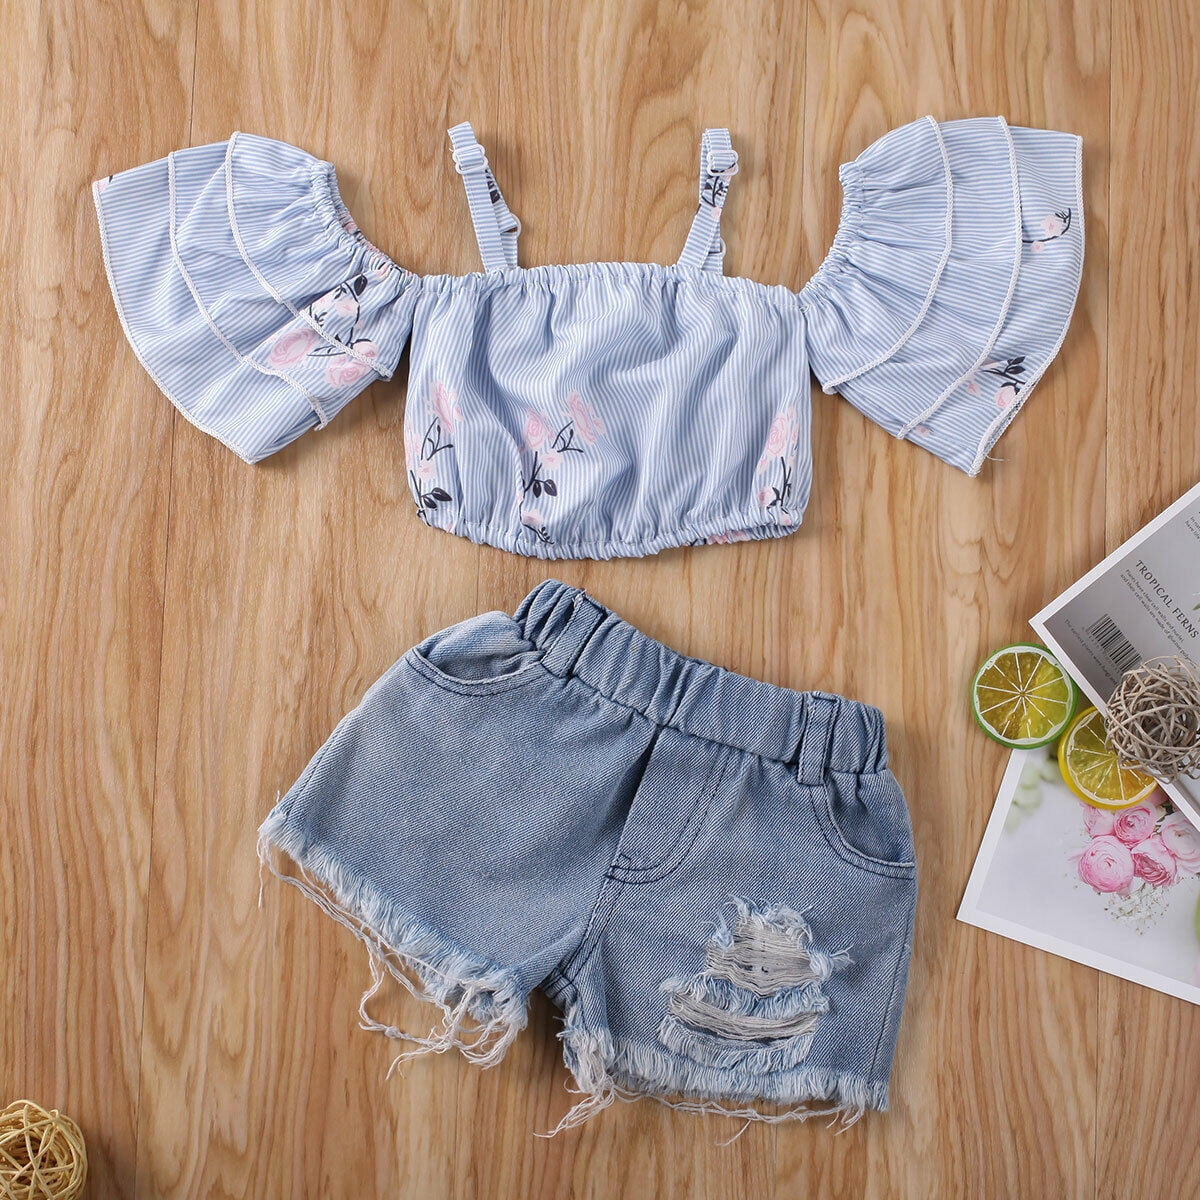 US Lace Newborn Baby Girl Ruffle Tops+Demin Shorts Dress+Headband Outfit Clothes 